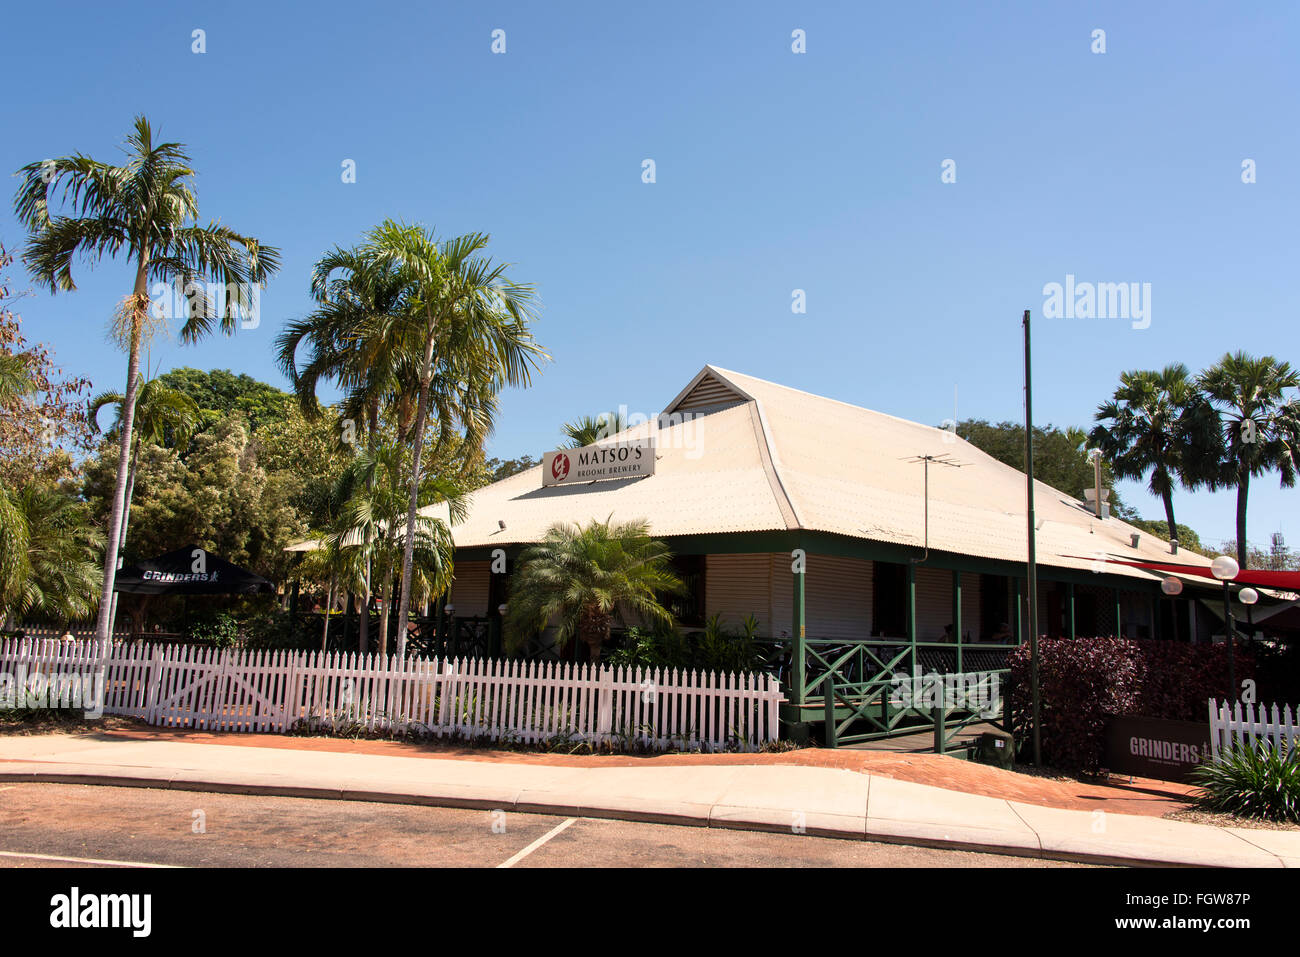 Metso's bar and restaurant on Hamersley St, produces its own beer in Broome, a coastal, pearling and tourist town in the Kimberl Stock Photo